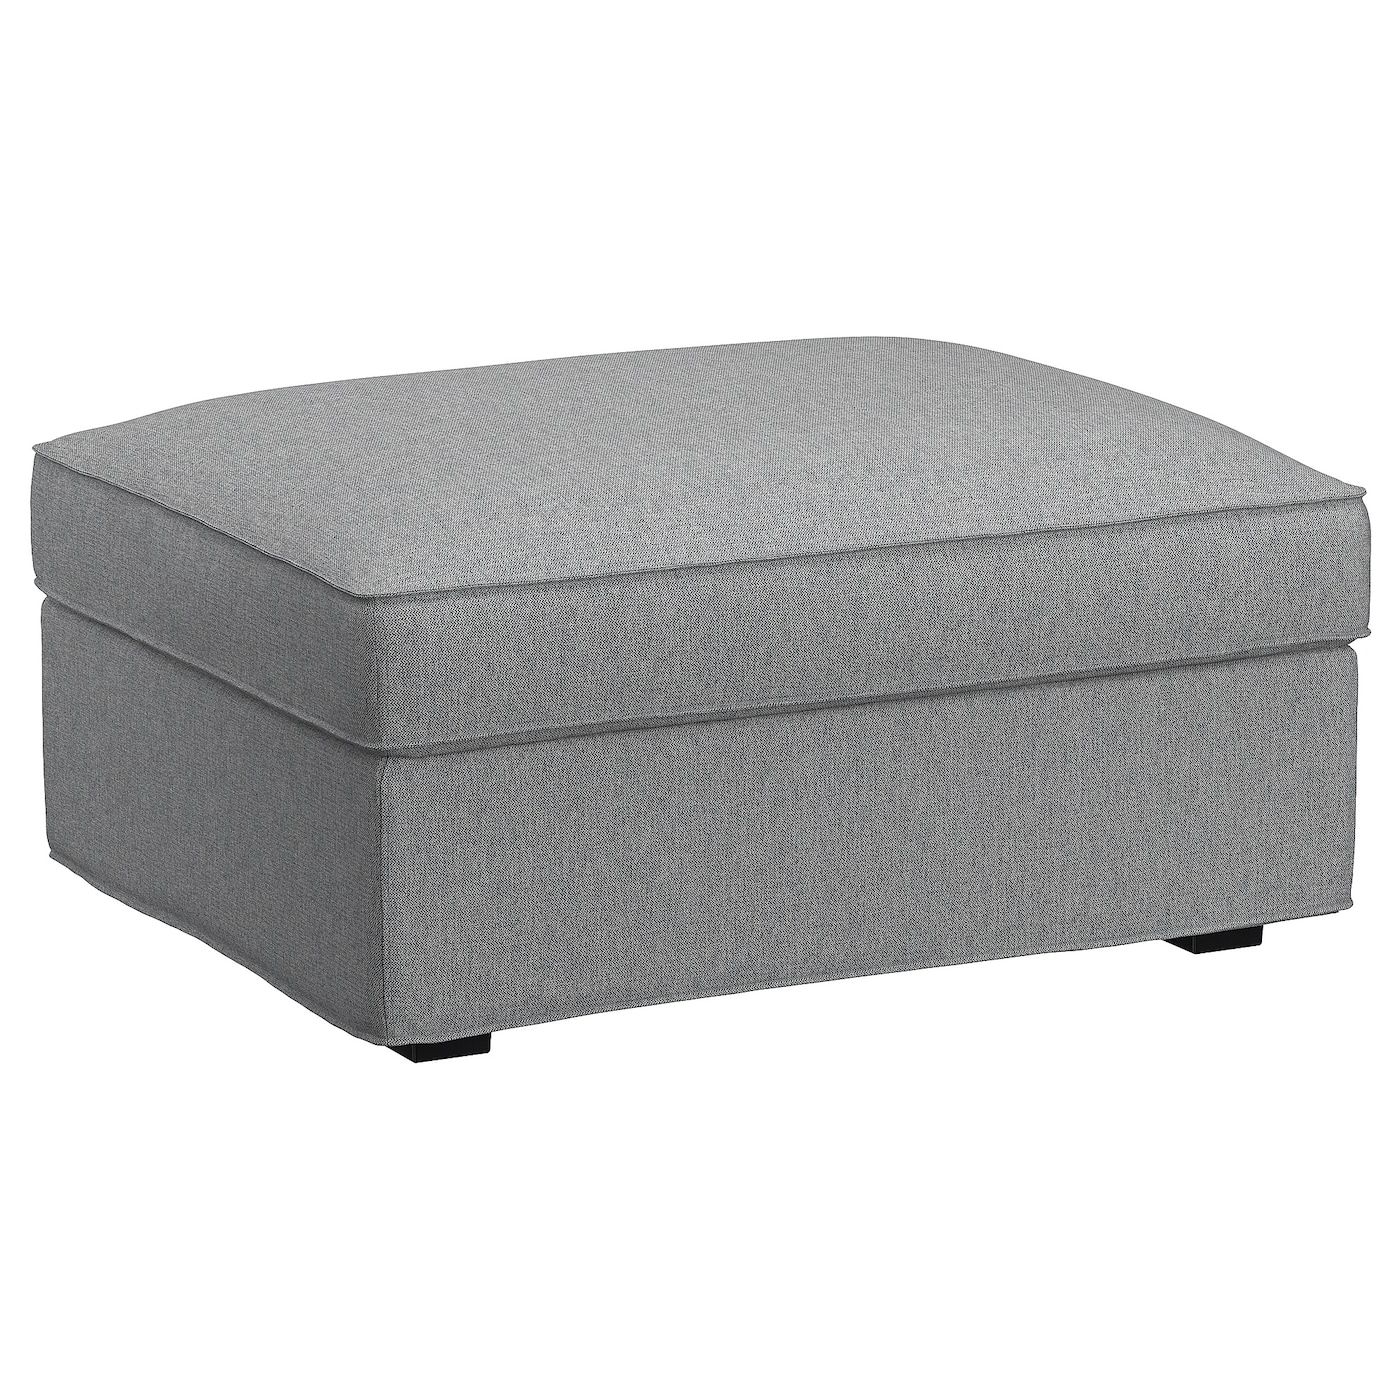 Latest Kivik Ottoman With Storage, Tibbleby Beige/gray – Ikea Within Light Gray Ottomans (View 4 of 10)